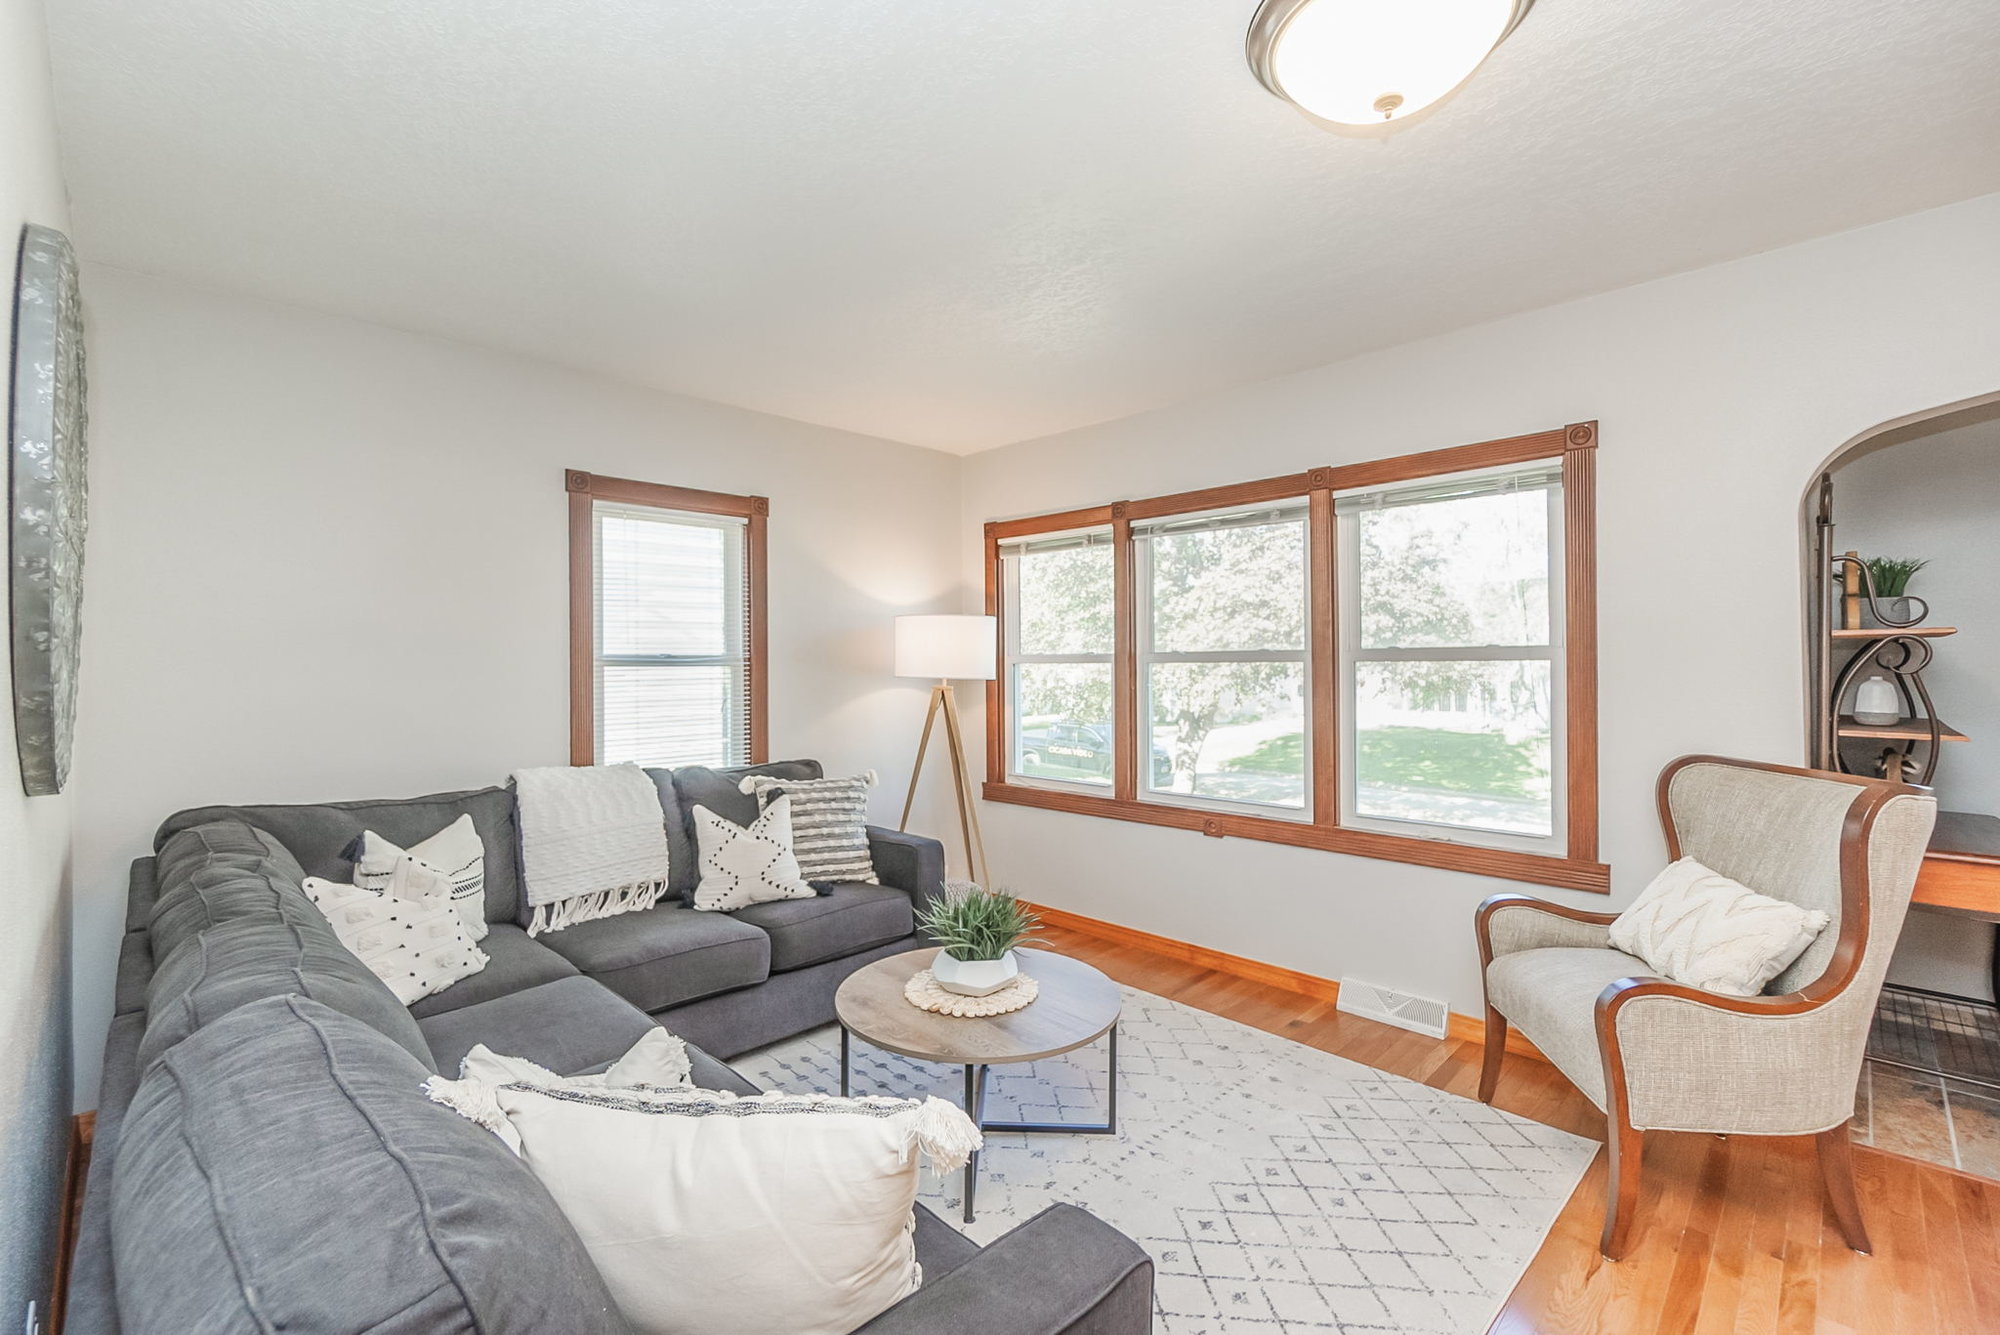 Picture Perfect Move In Ready Waterloo Home